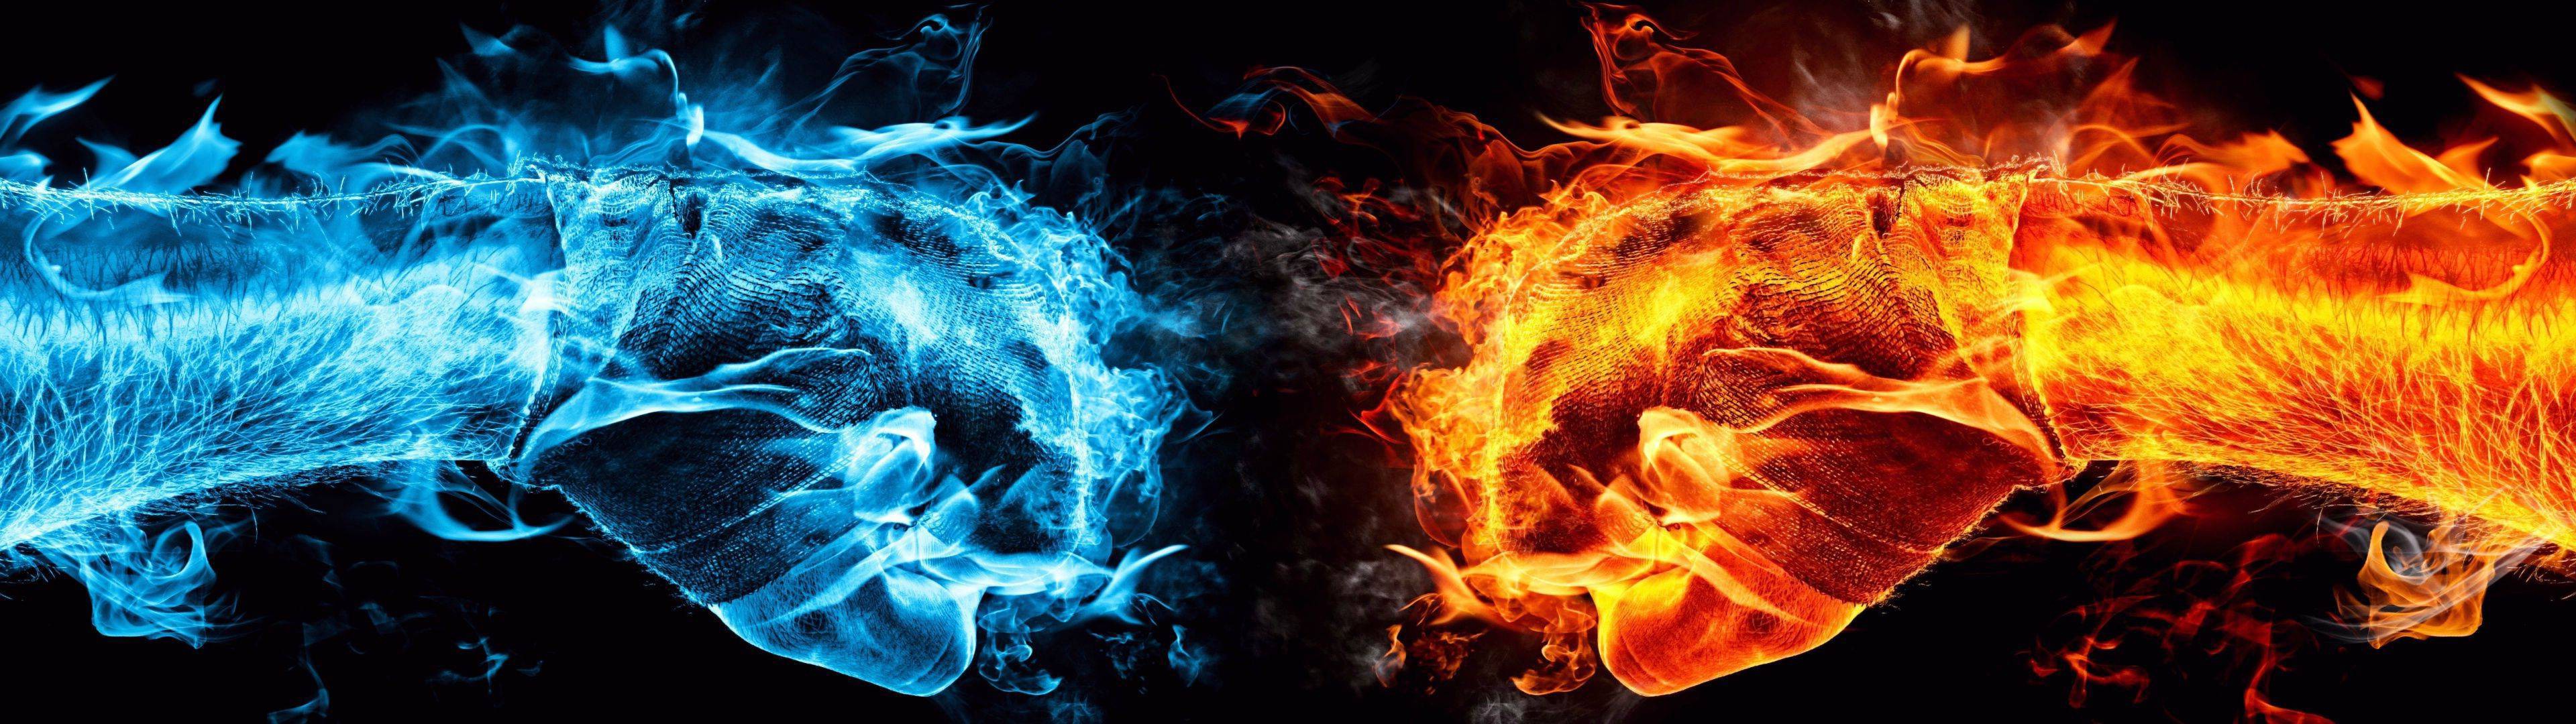 The confrontation of fire and cold